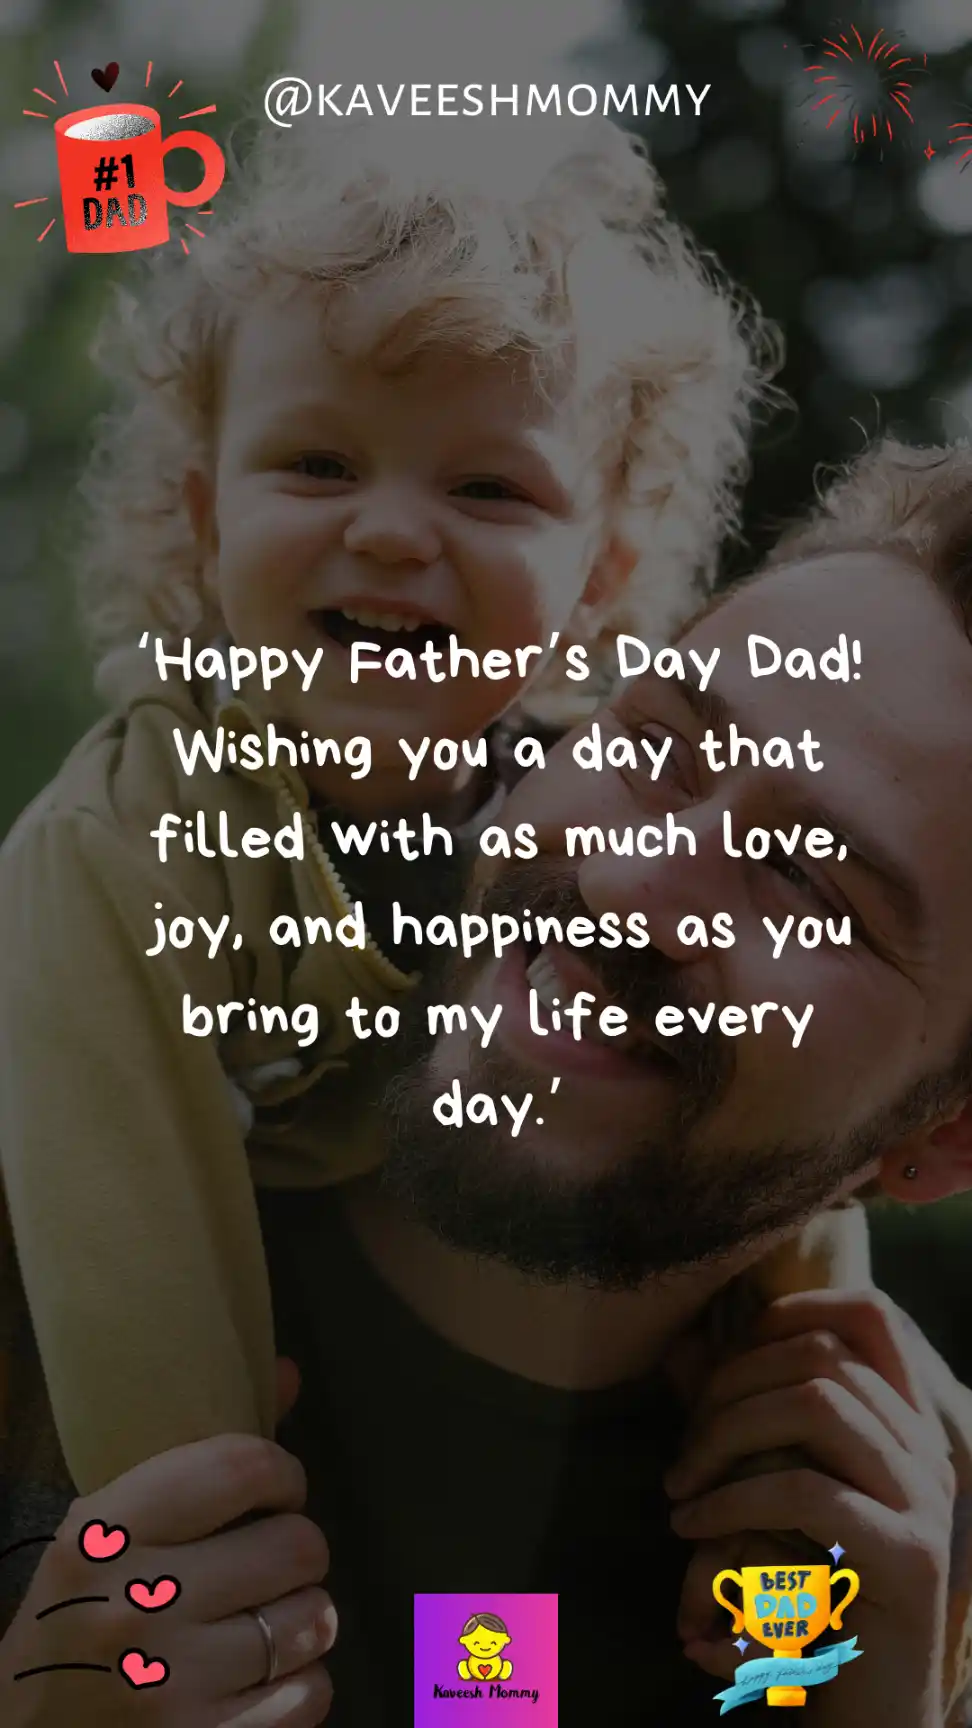 quotes about daddy and son-‘Happy Father’s Day Dad! Wishing you a day that filled with as much love, joy, and happiness as you bring to my life every day.’